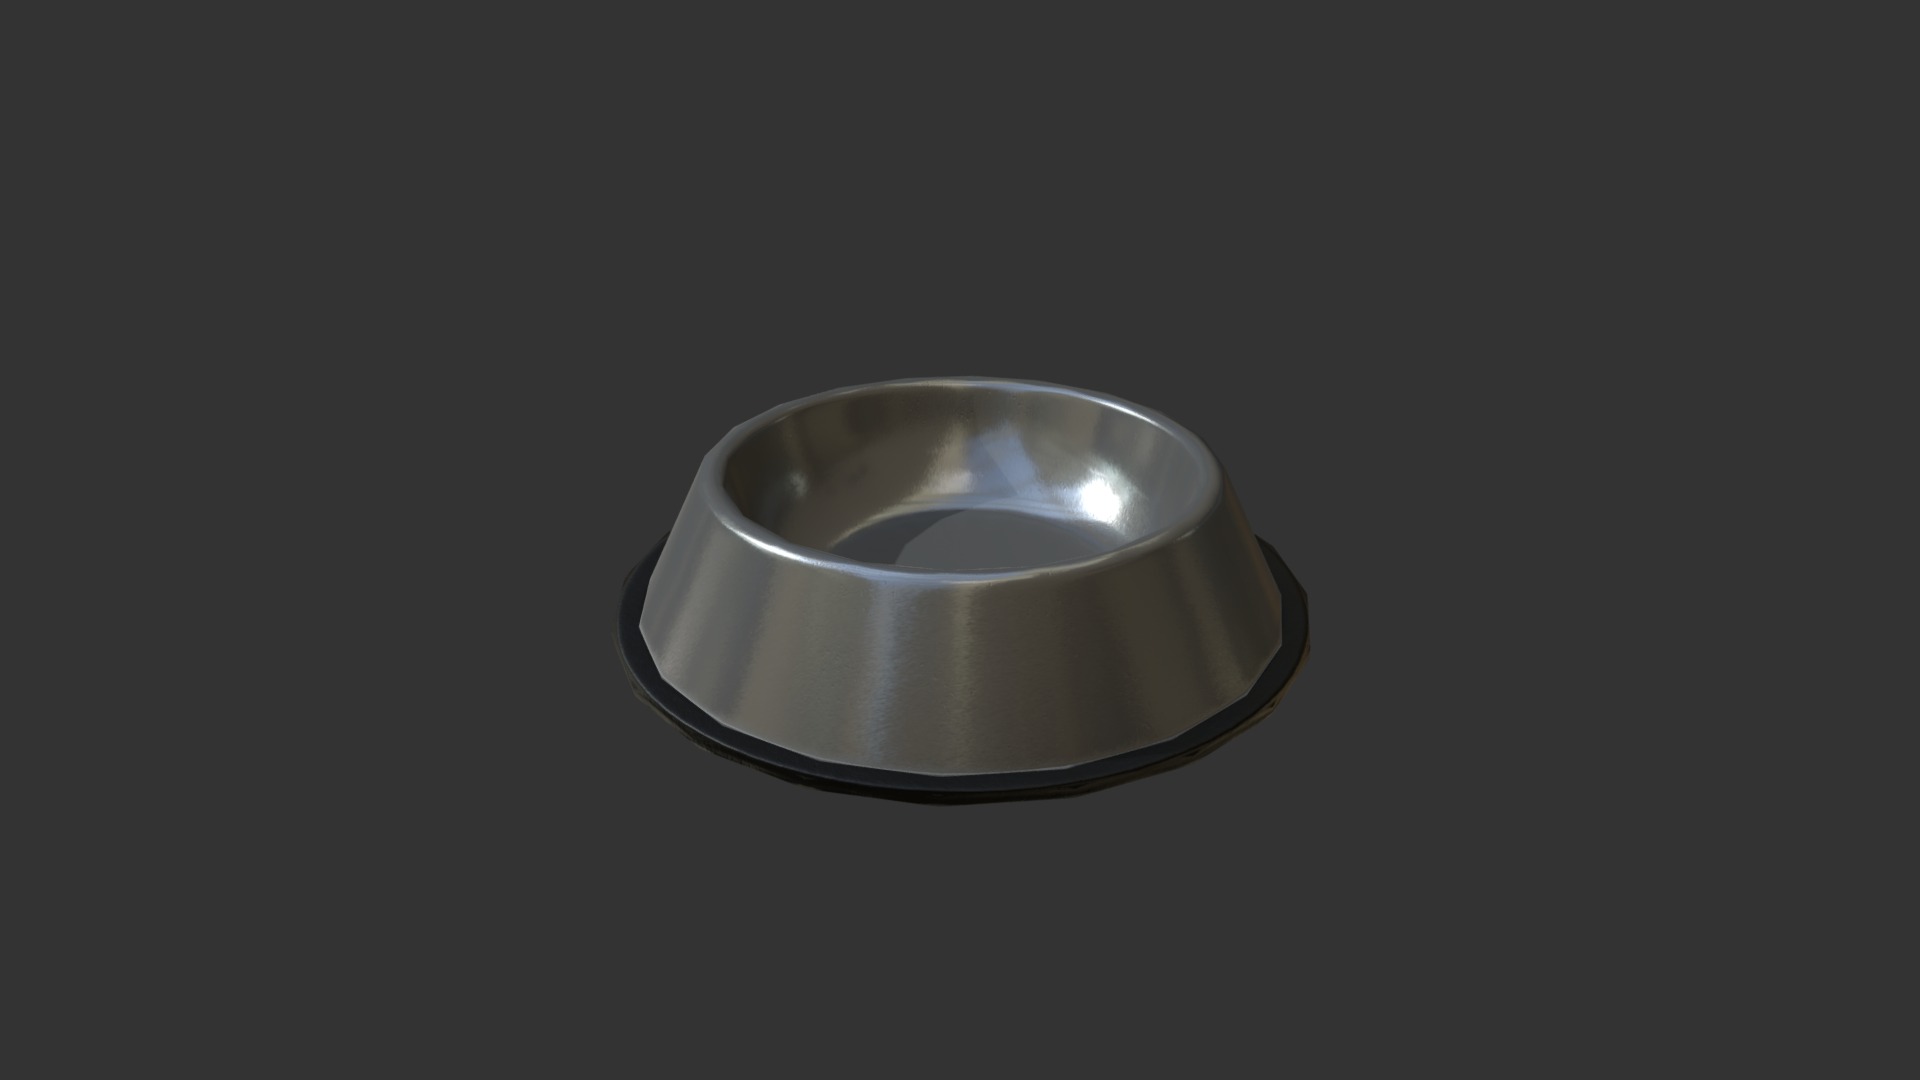 3D model Pet Food Bowl - This is a 3D model of the Pet Food Bowl. The 3D model is about a ring on a surface.